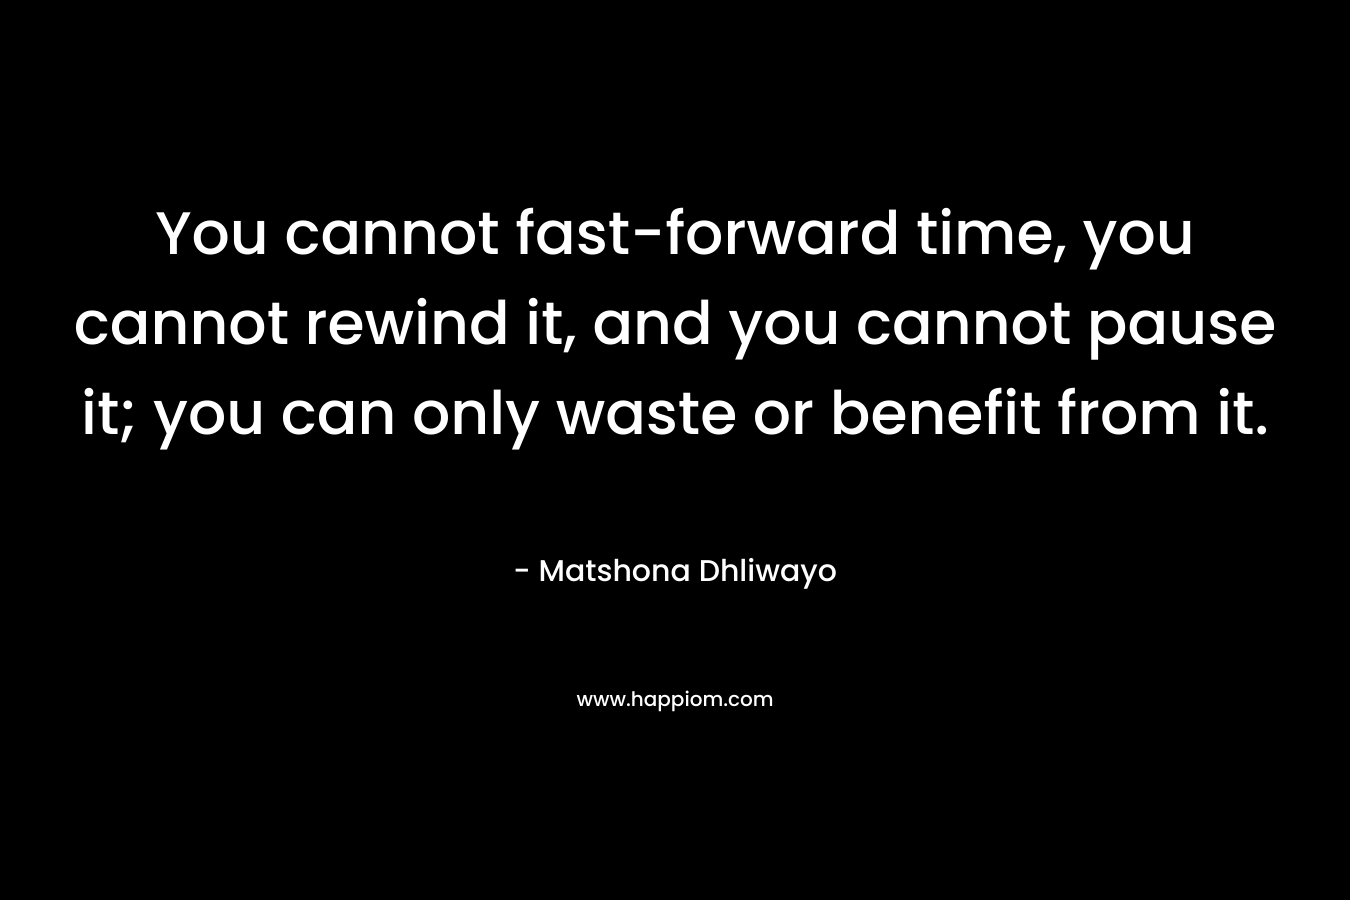 You cannot fast-forward time, you cannot rewind it, and you cannot pause it; you can only waste or benefit from it.